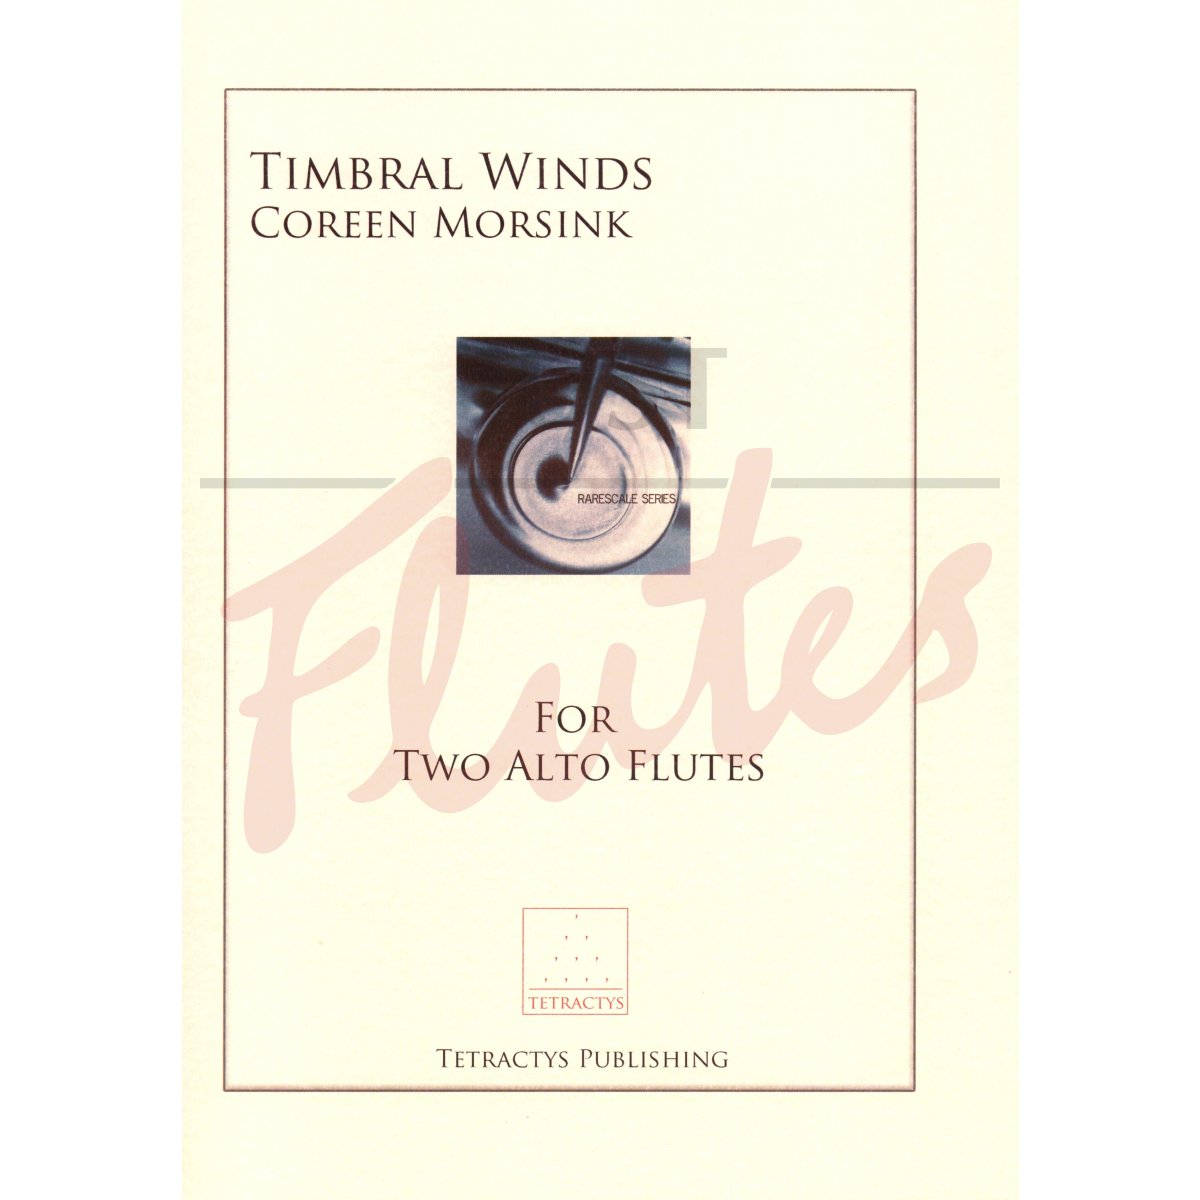 Timbral Winds for Two Alto Flutes